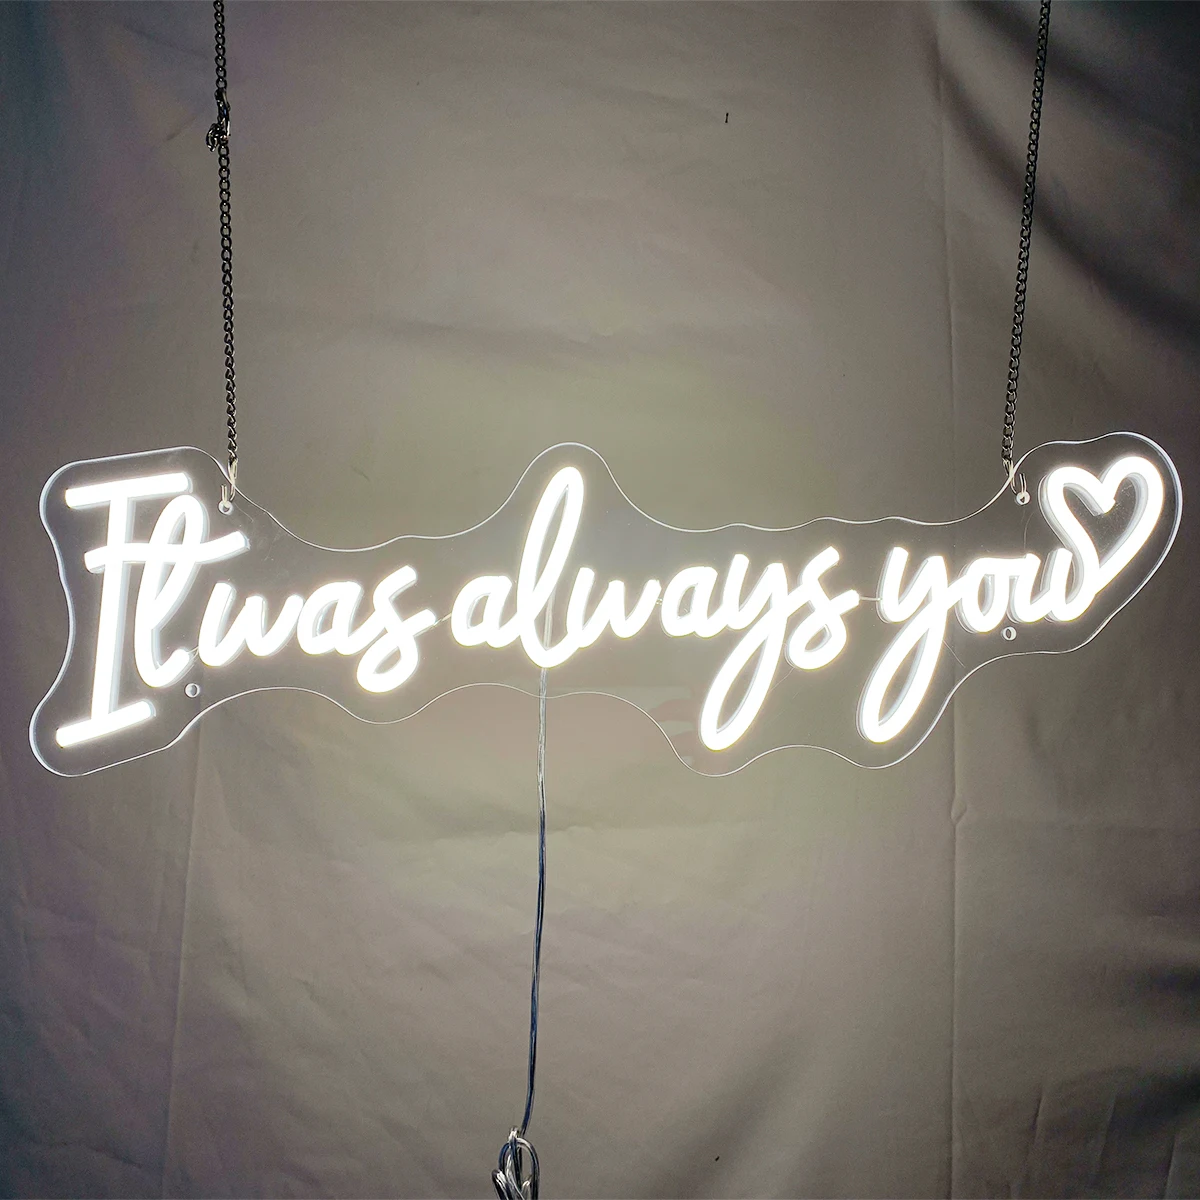 

Tewas always you neon sign custom made for couples to express their love for wedding decorations birthday party atmosphere neon